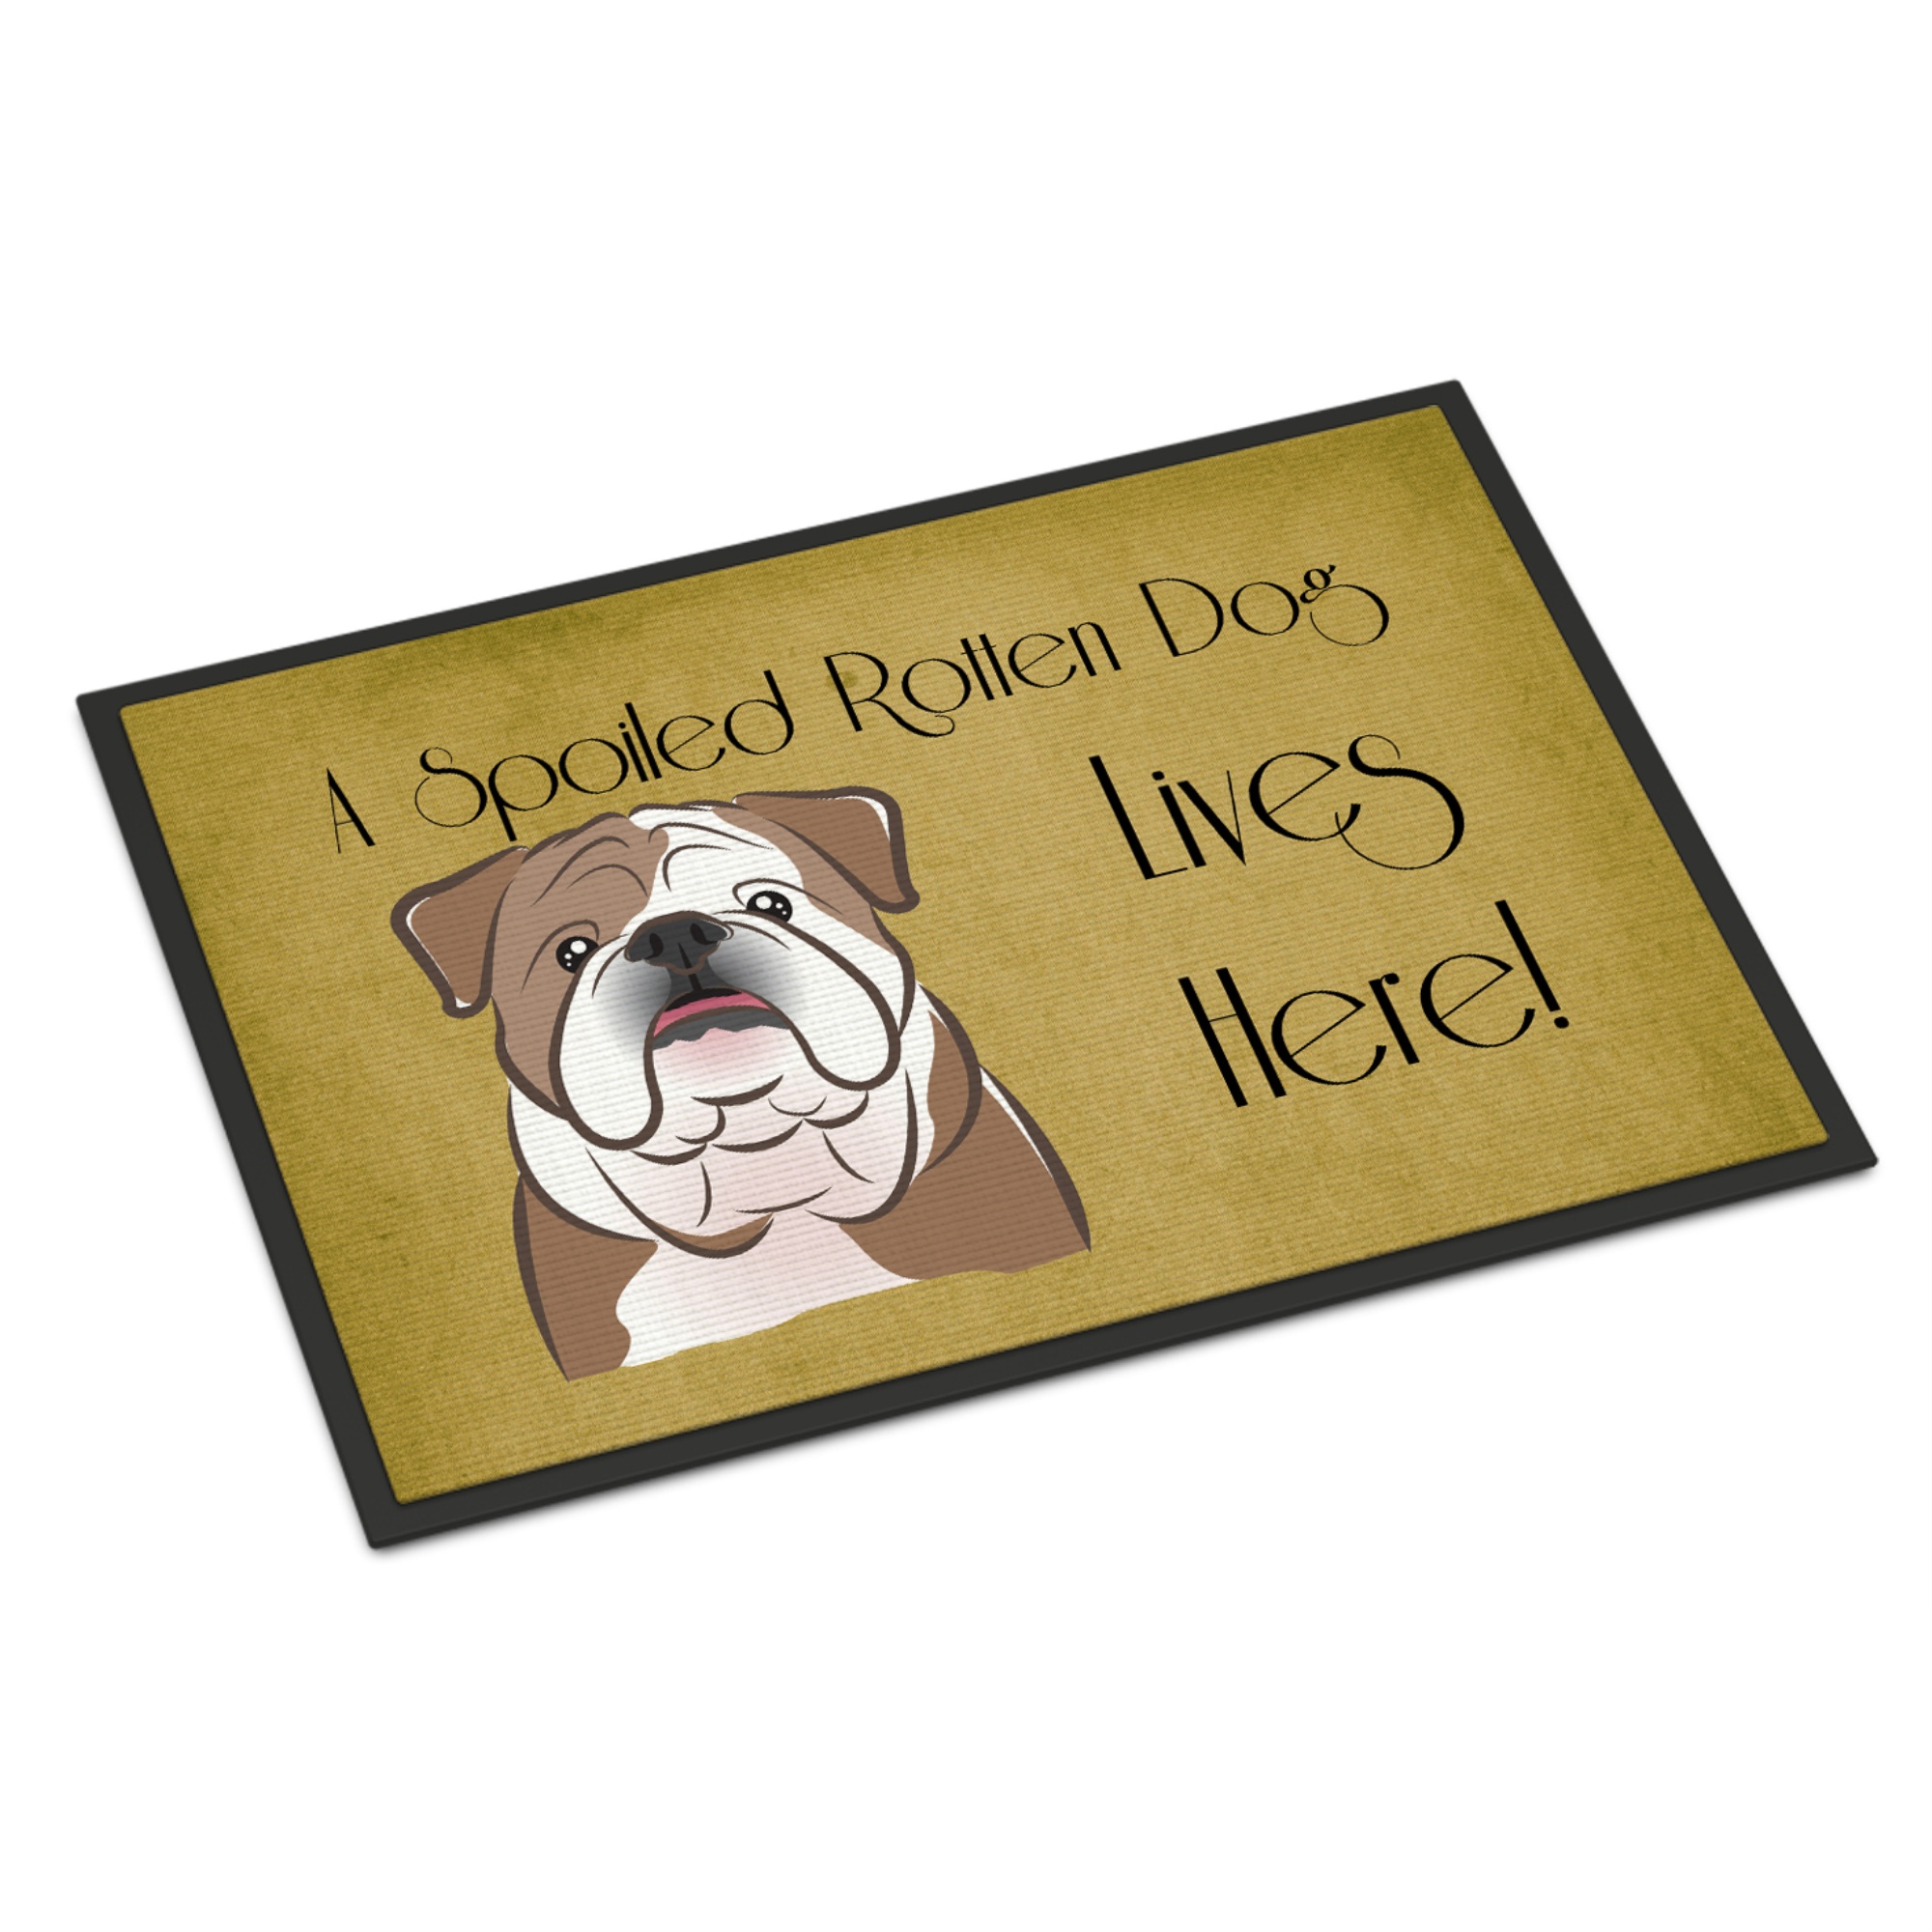 Caroline's Treasures "Caroline's Treasures BB1467MAT English Bulldog Spoiled Dog Lives Here Indoor or Outdoor Mat, 18 x 27"", Multicolor"